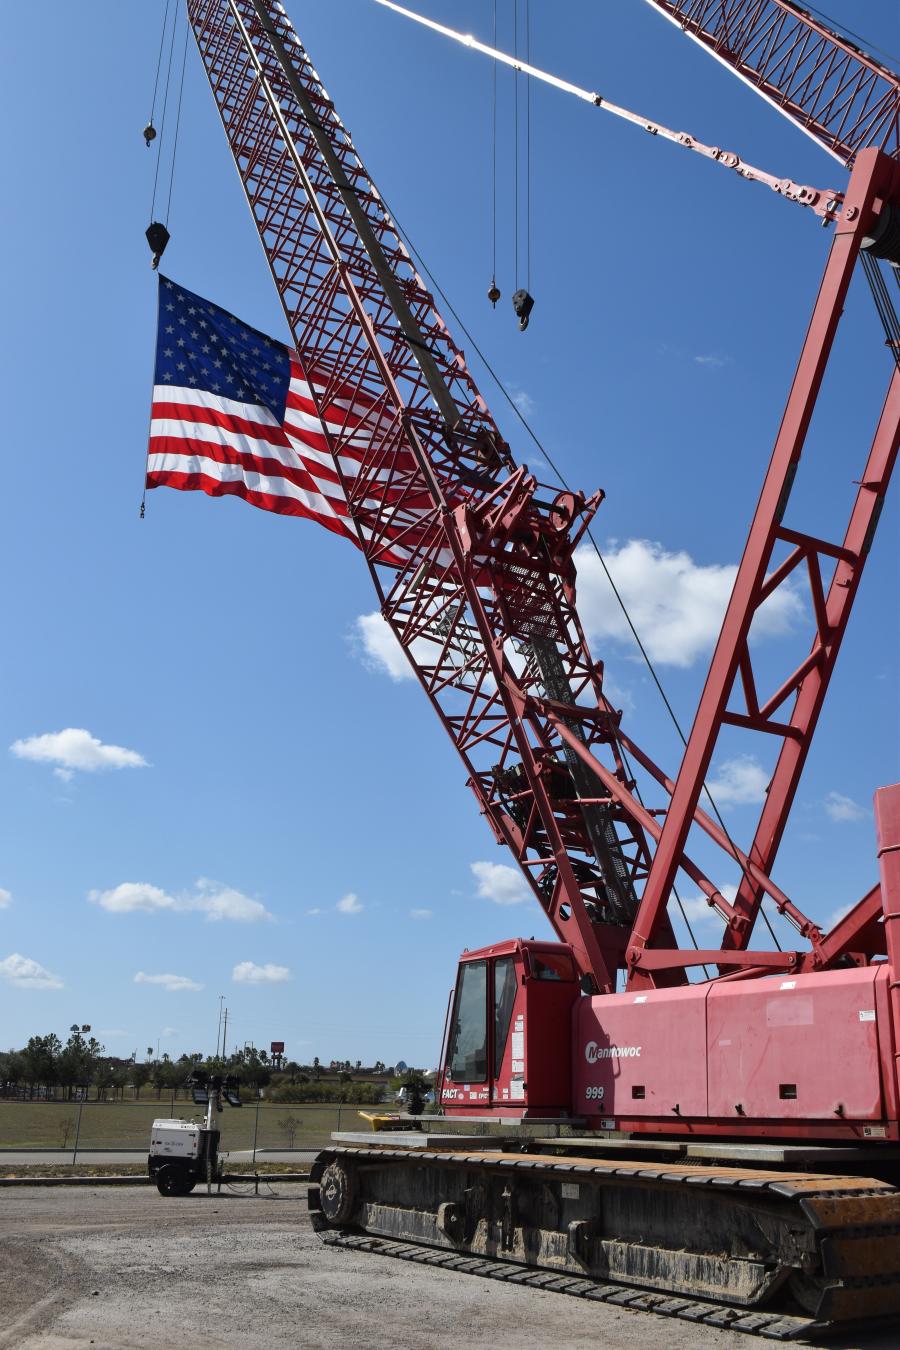 A Manitowoc crane proudly flies Old Glory.